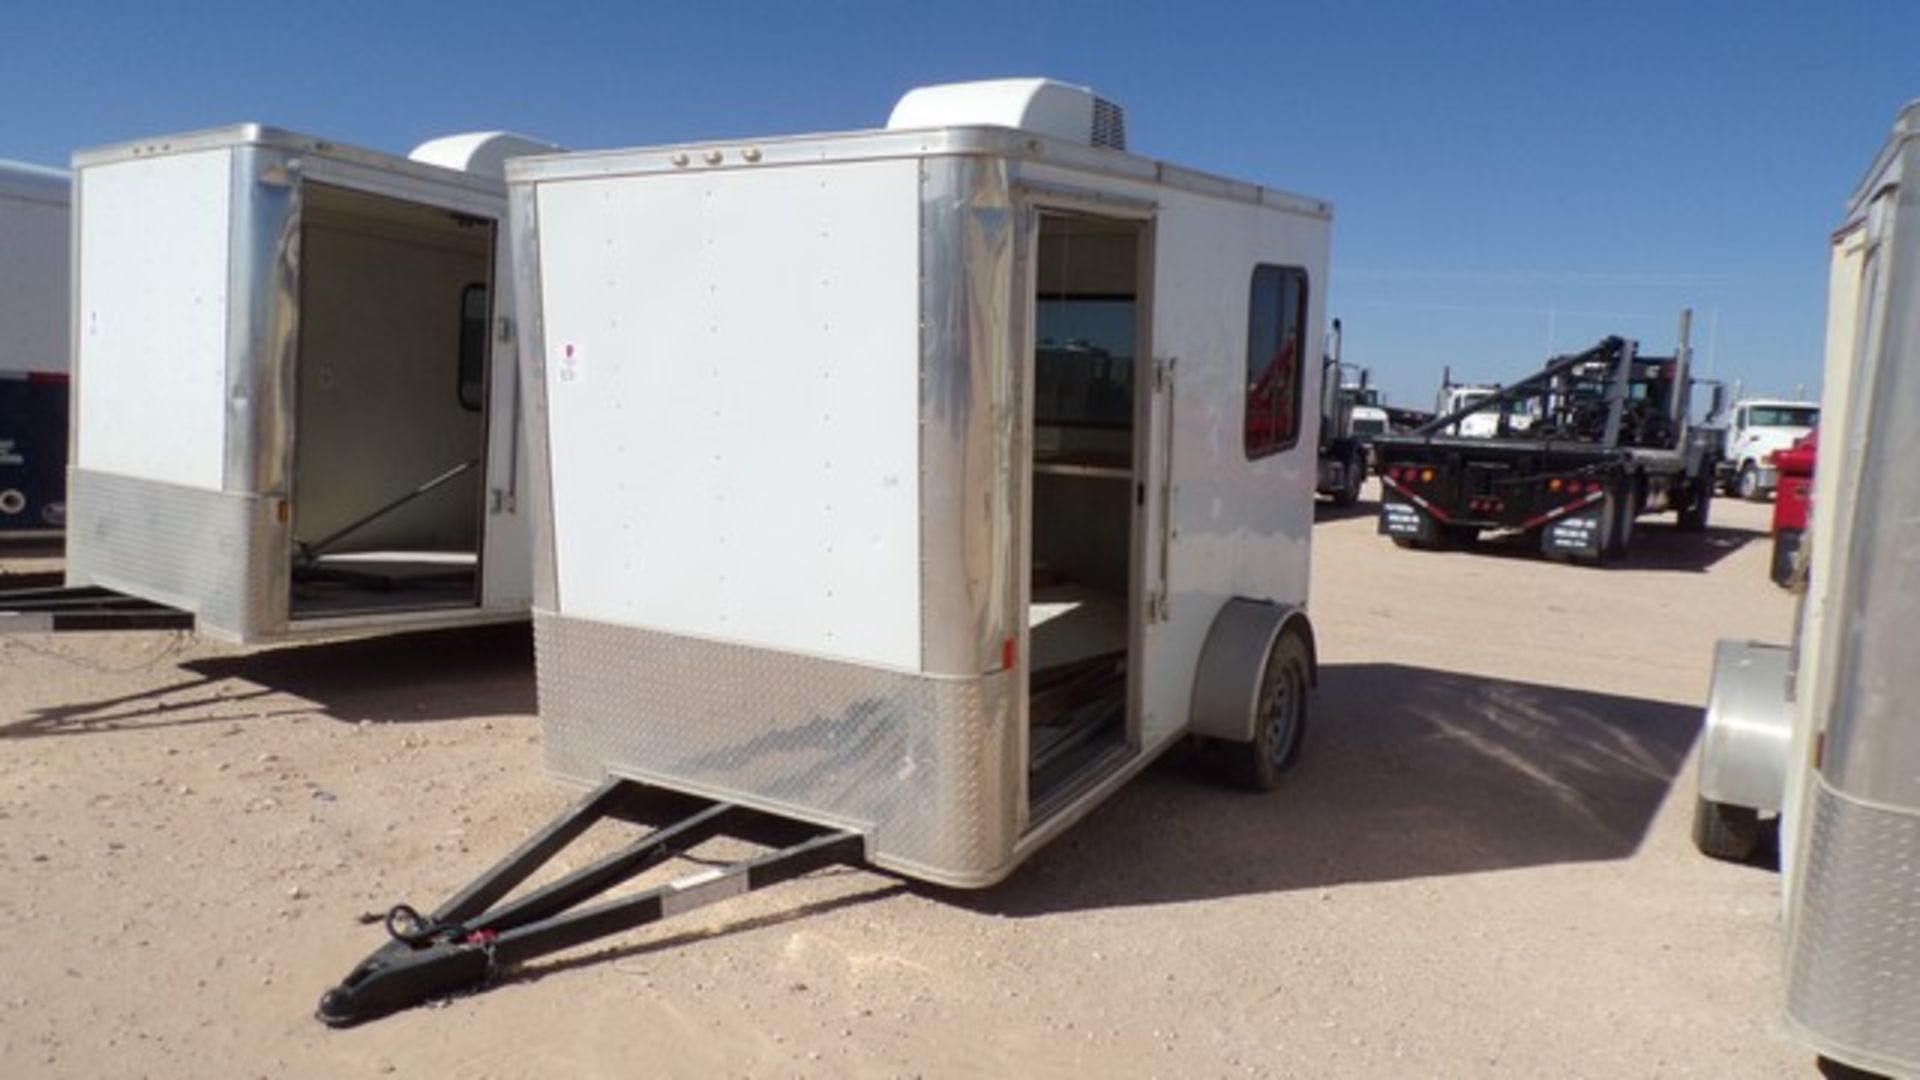 Located in YARD 1 - Midland, TX (2315) (X) 2018 ROCK SOLID CARGO S/A BP 6X10-3500# PORTABLE OFFICE - Image 2 of 6